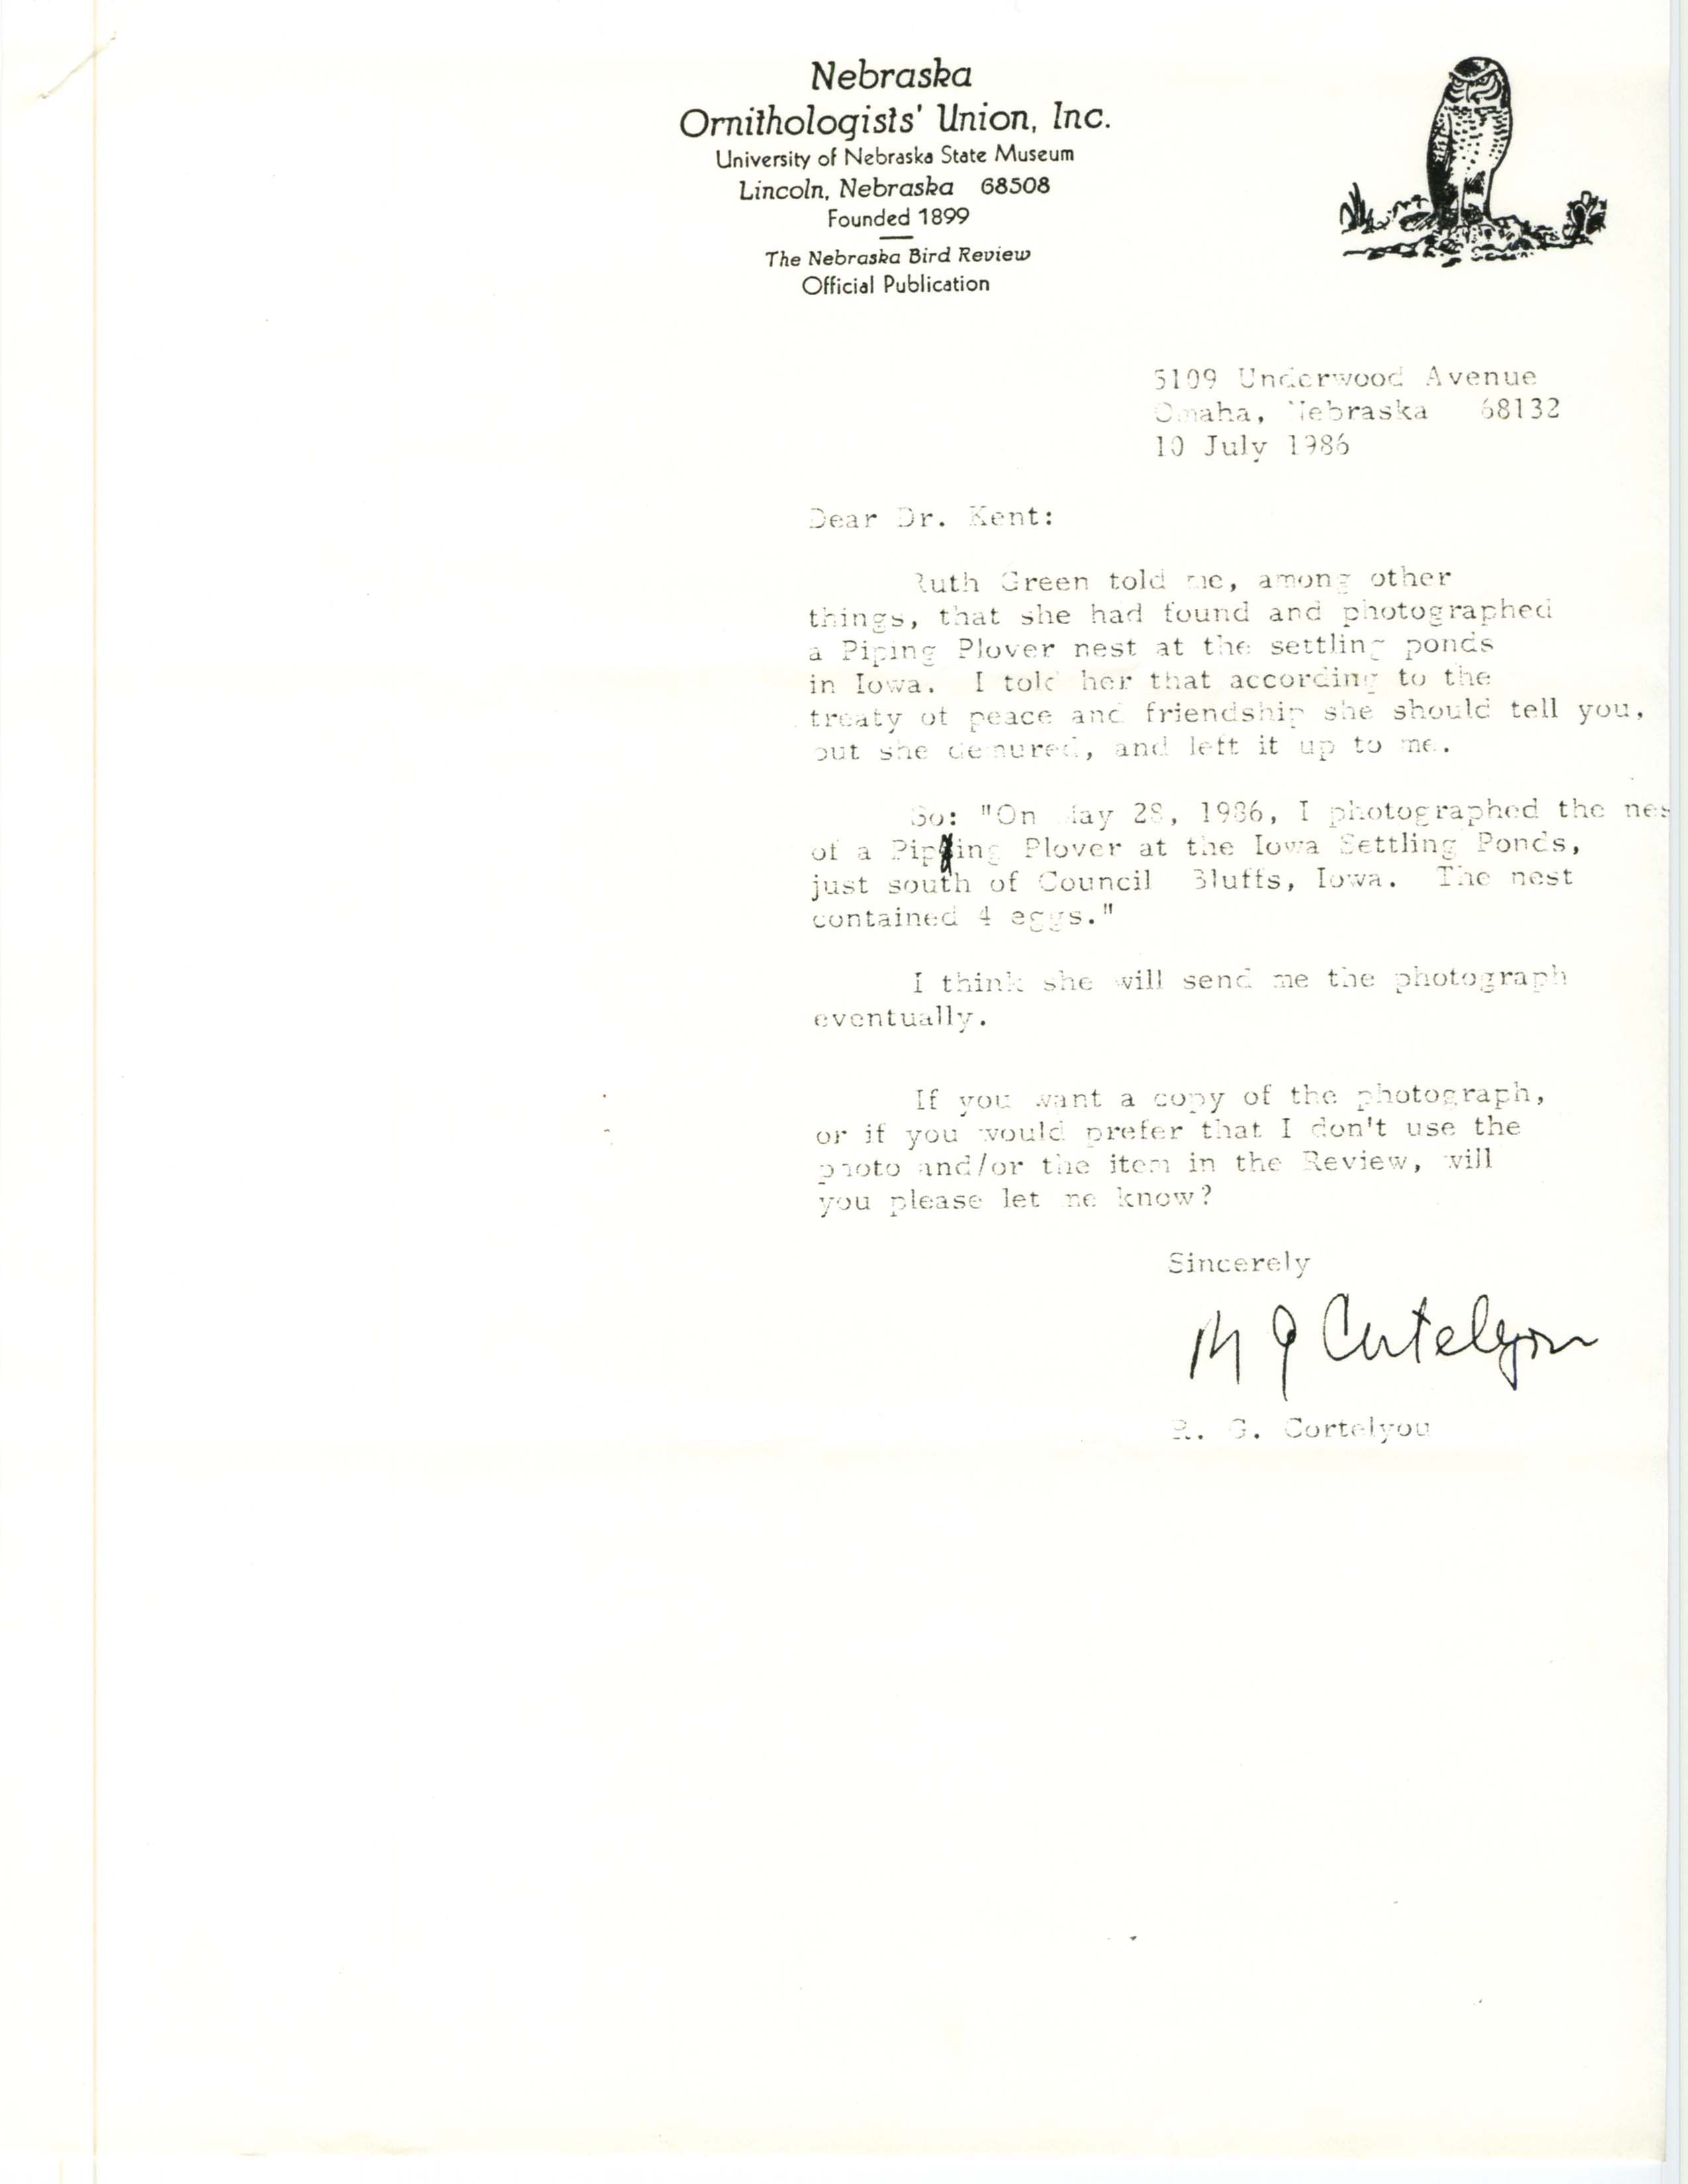 Two letters sent between Rushton G. Cortelyou and Thomas H. Kent, regarding a Piping Plover sighting, July 1986